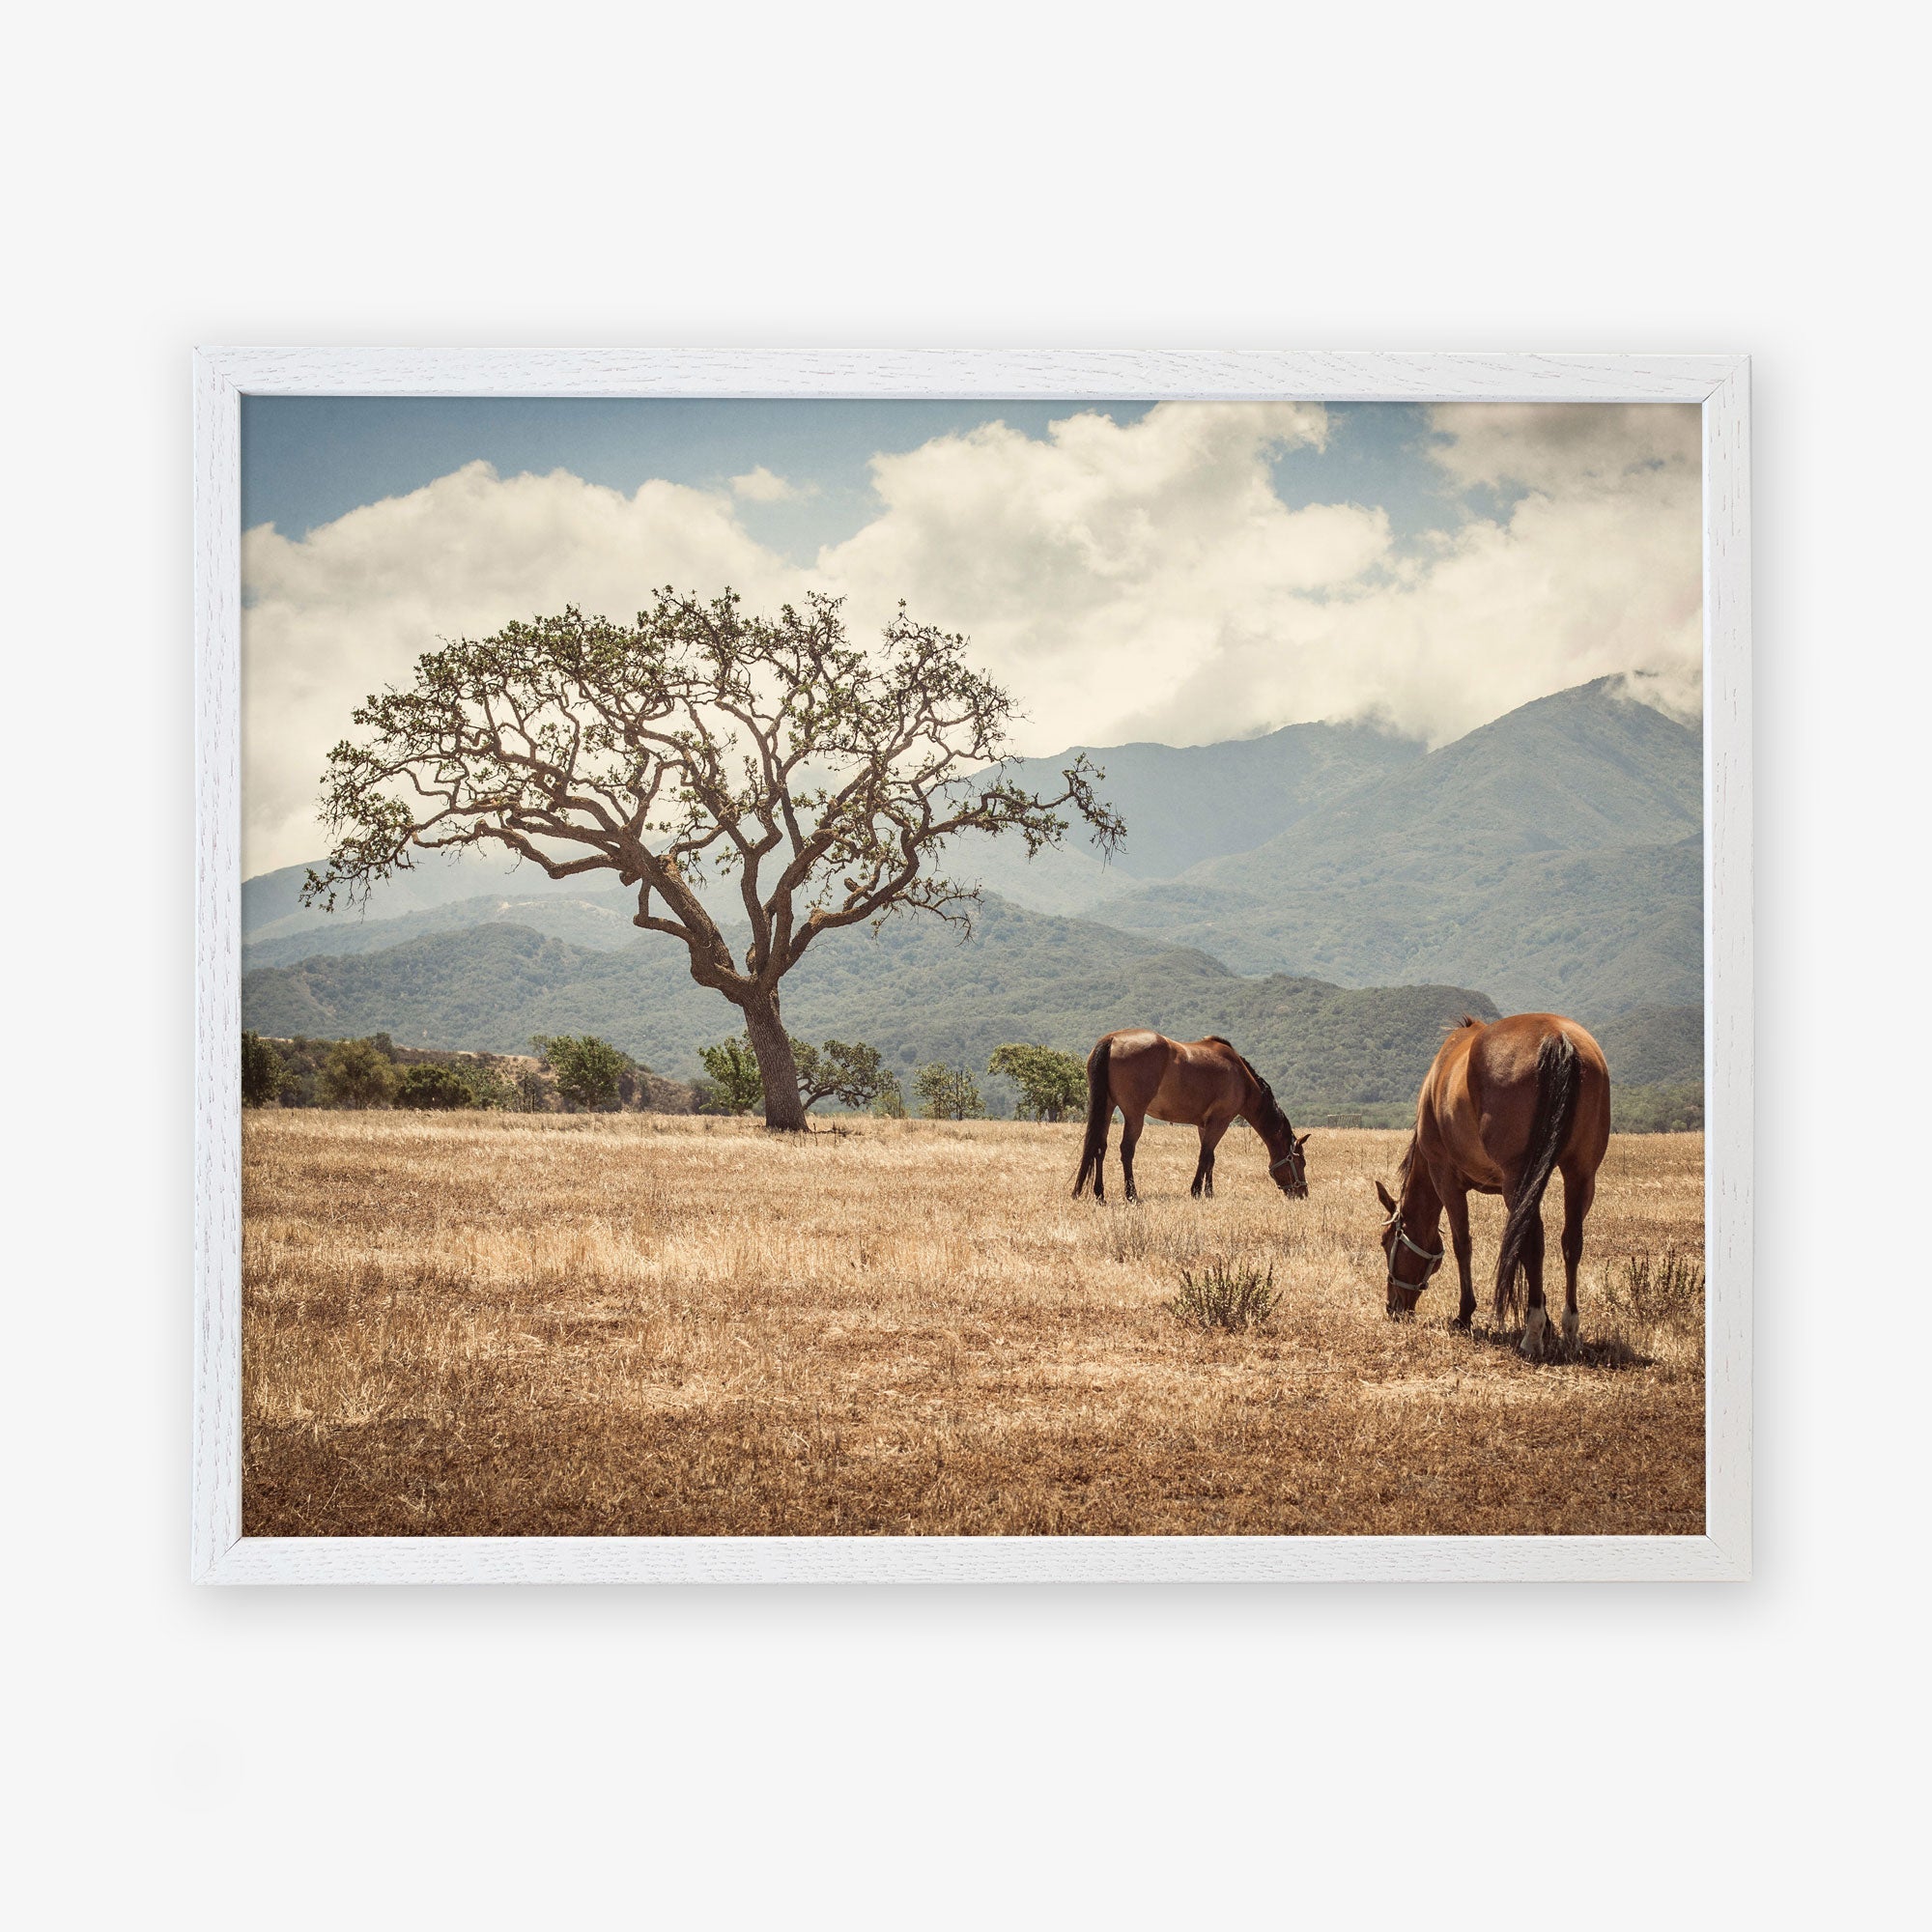 Two Rustic Prints of &#39;Santa Ynez Horses&#39; grazing peacefully under a large tree in the Santa Ynez Valley, with mountains partially covered by clouds in the background, by Offley Green.